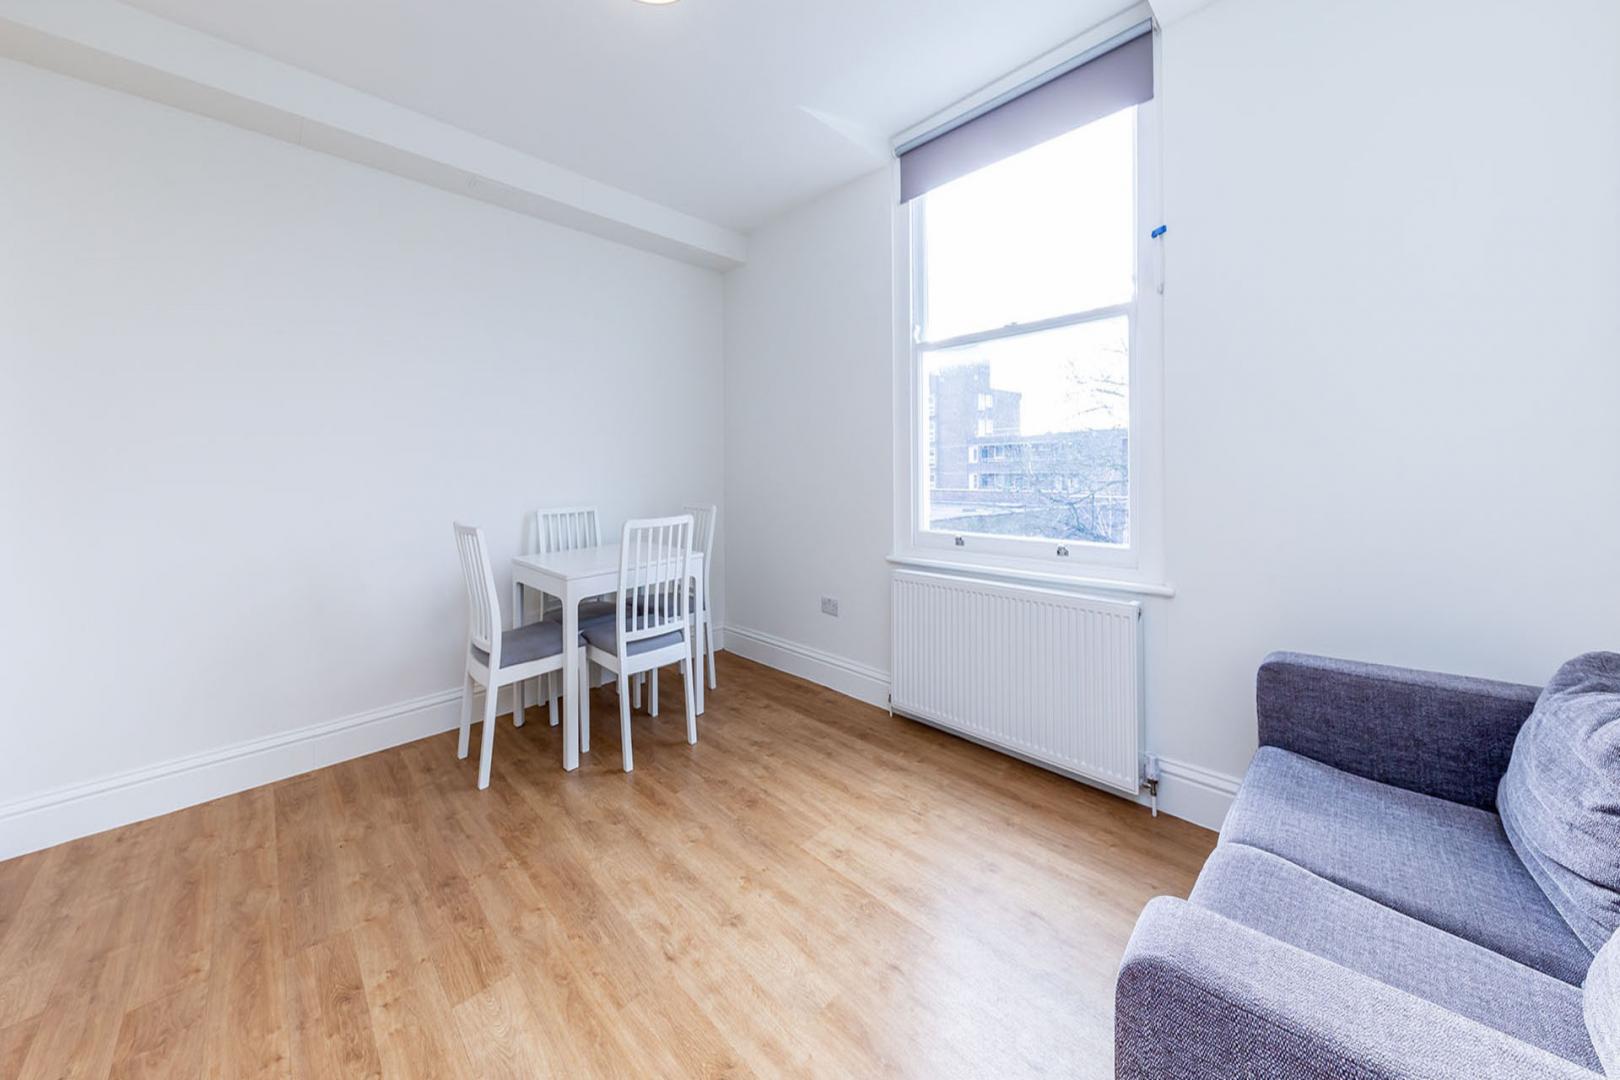 Located minutes to Finsbury Park Station a lovely modern 2 bedroom property Stroud Green Road, Finsbury Park